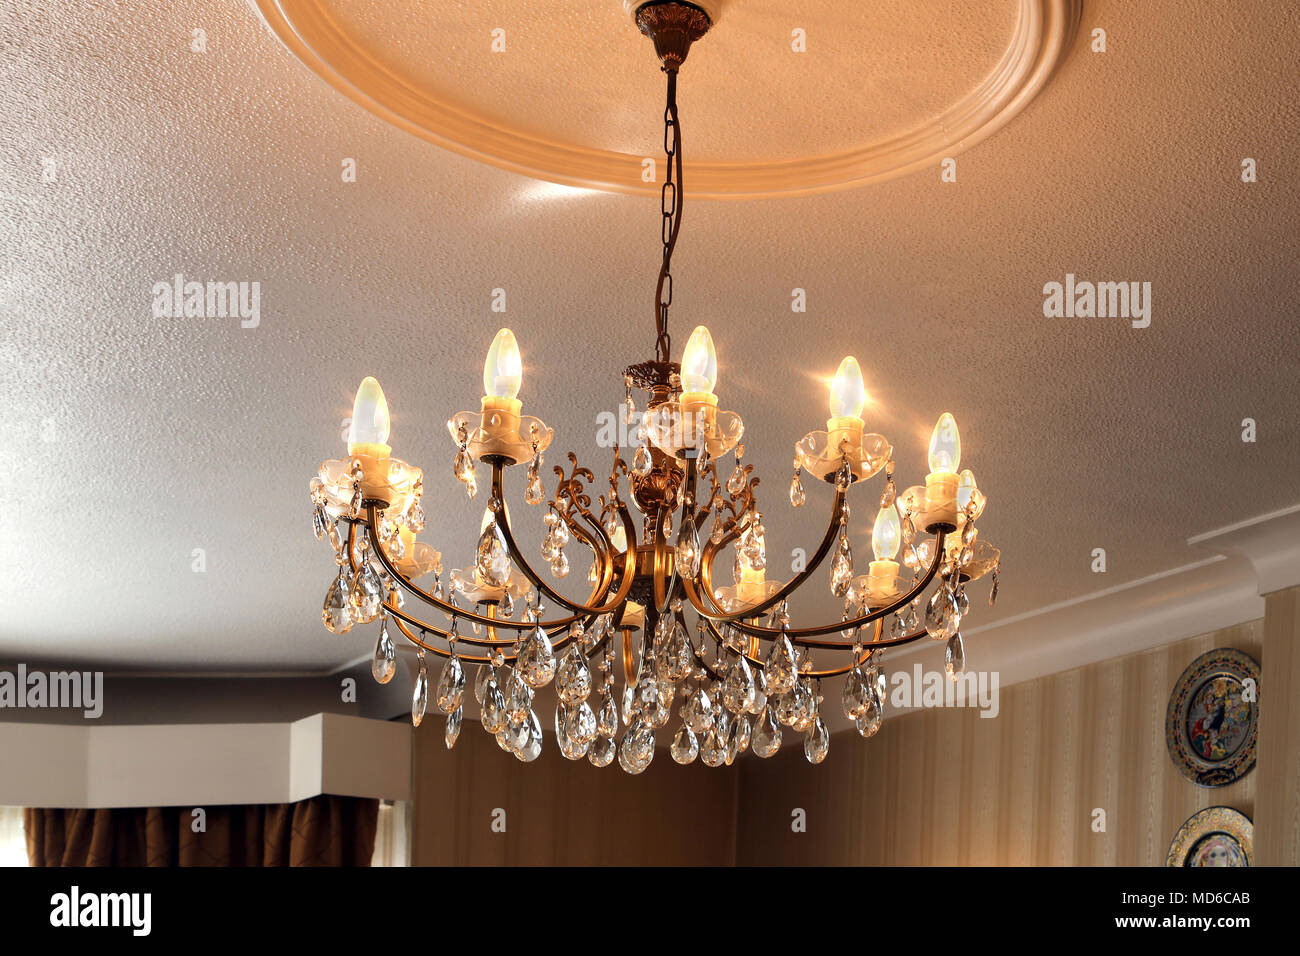 Victorian Crytal Chandelier Stock Photo